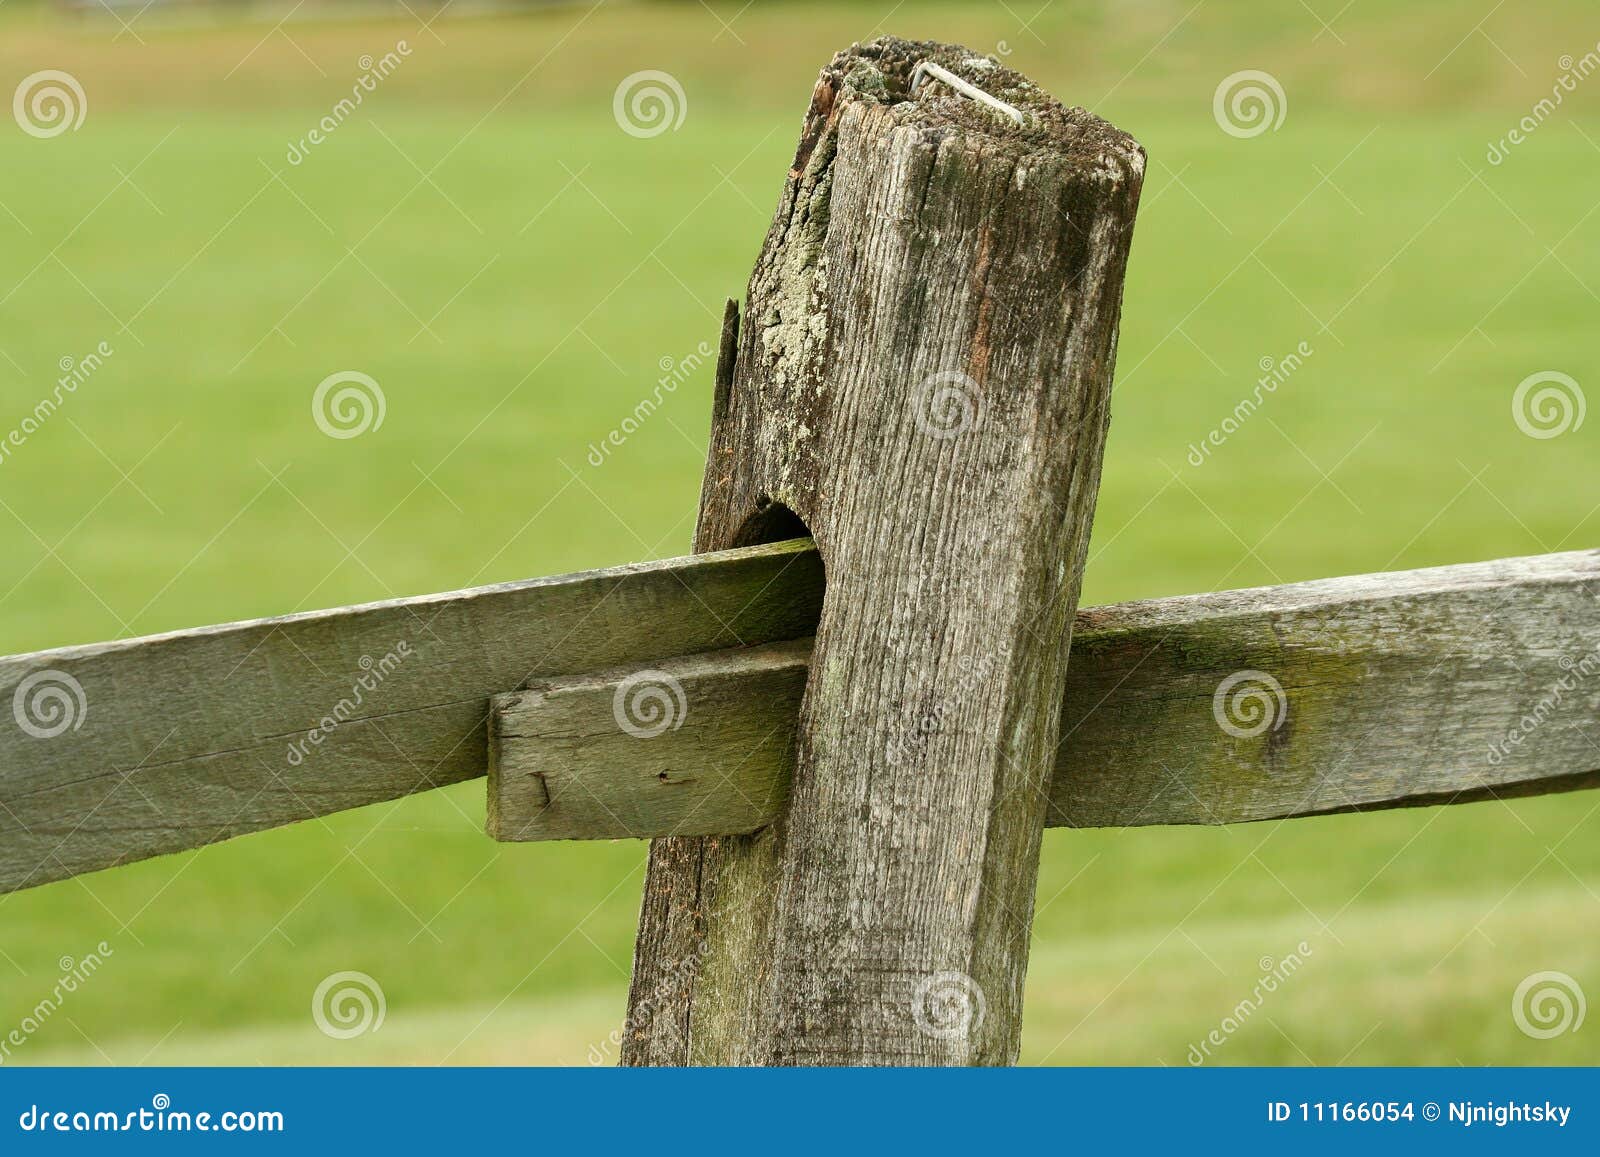 Wooden Fence Post Stock Images - Image: 11166054